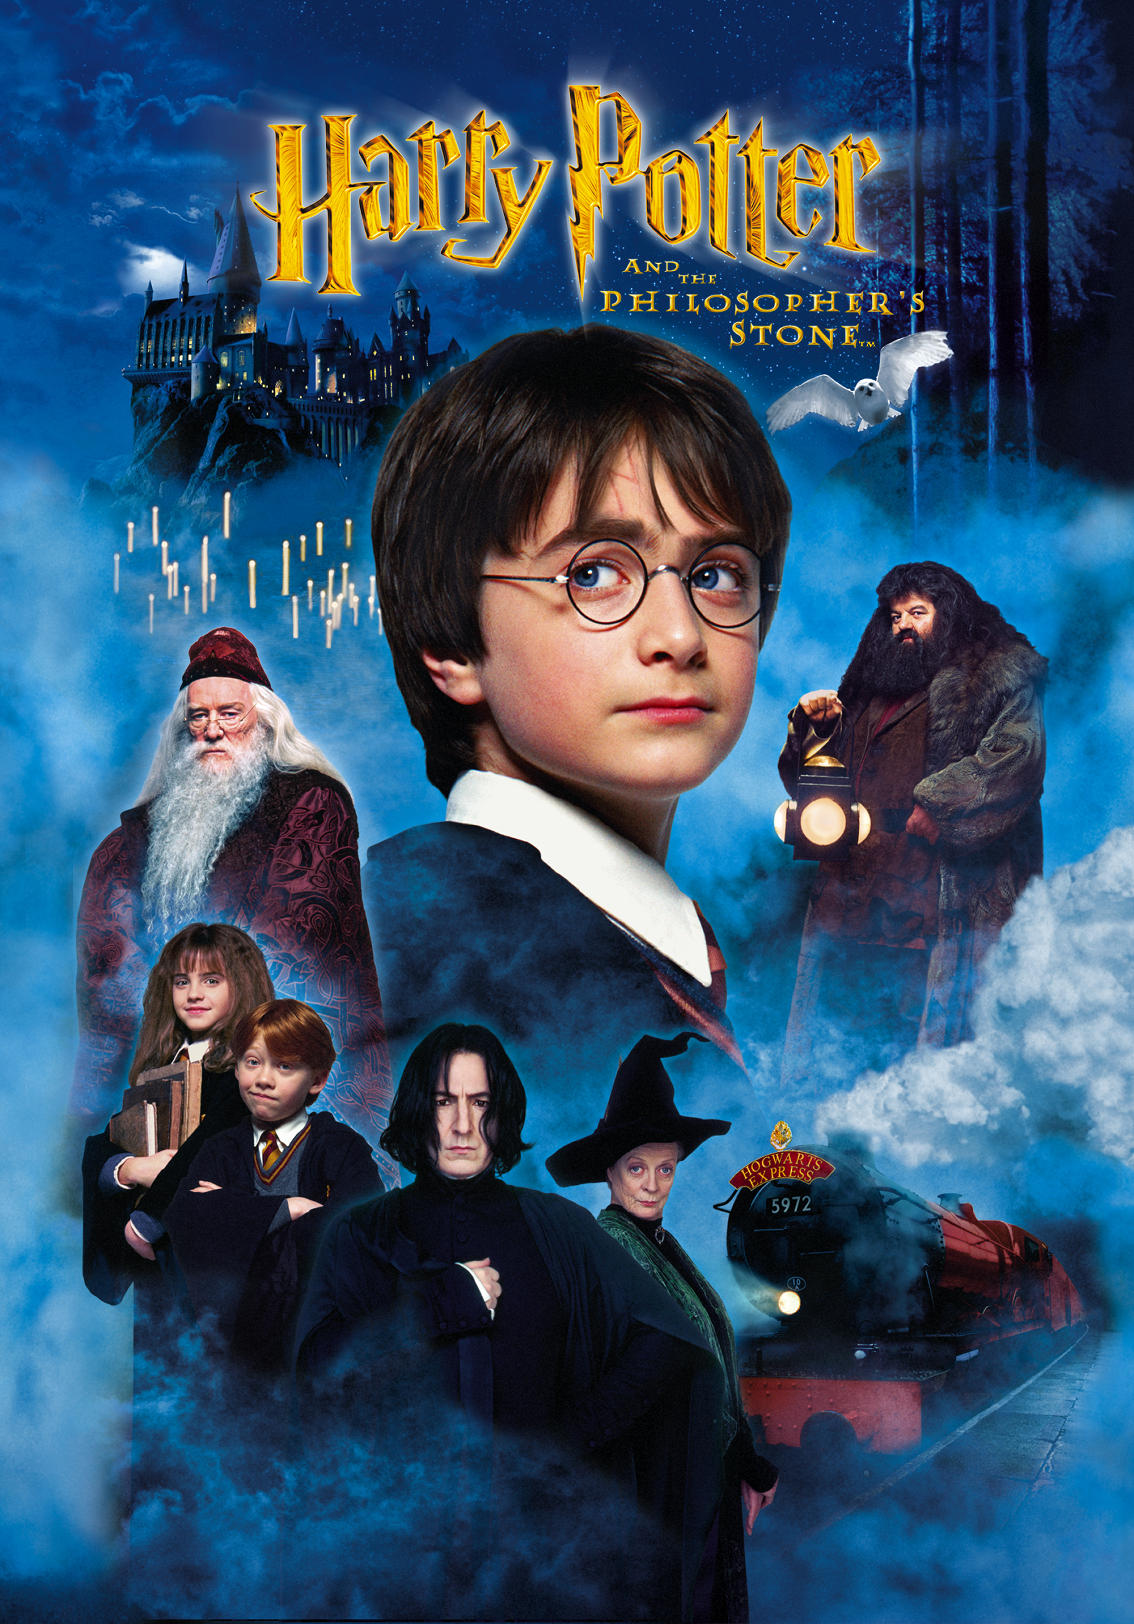 Harry Potter and the Philosopher's Stone (2001